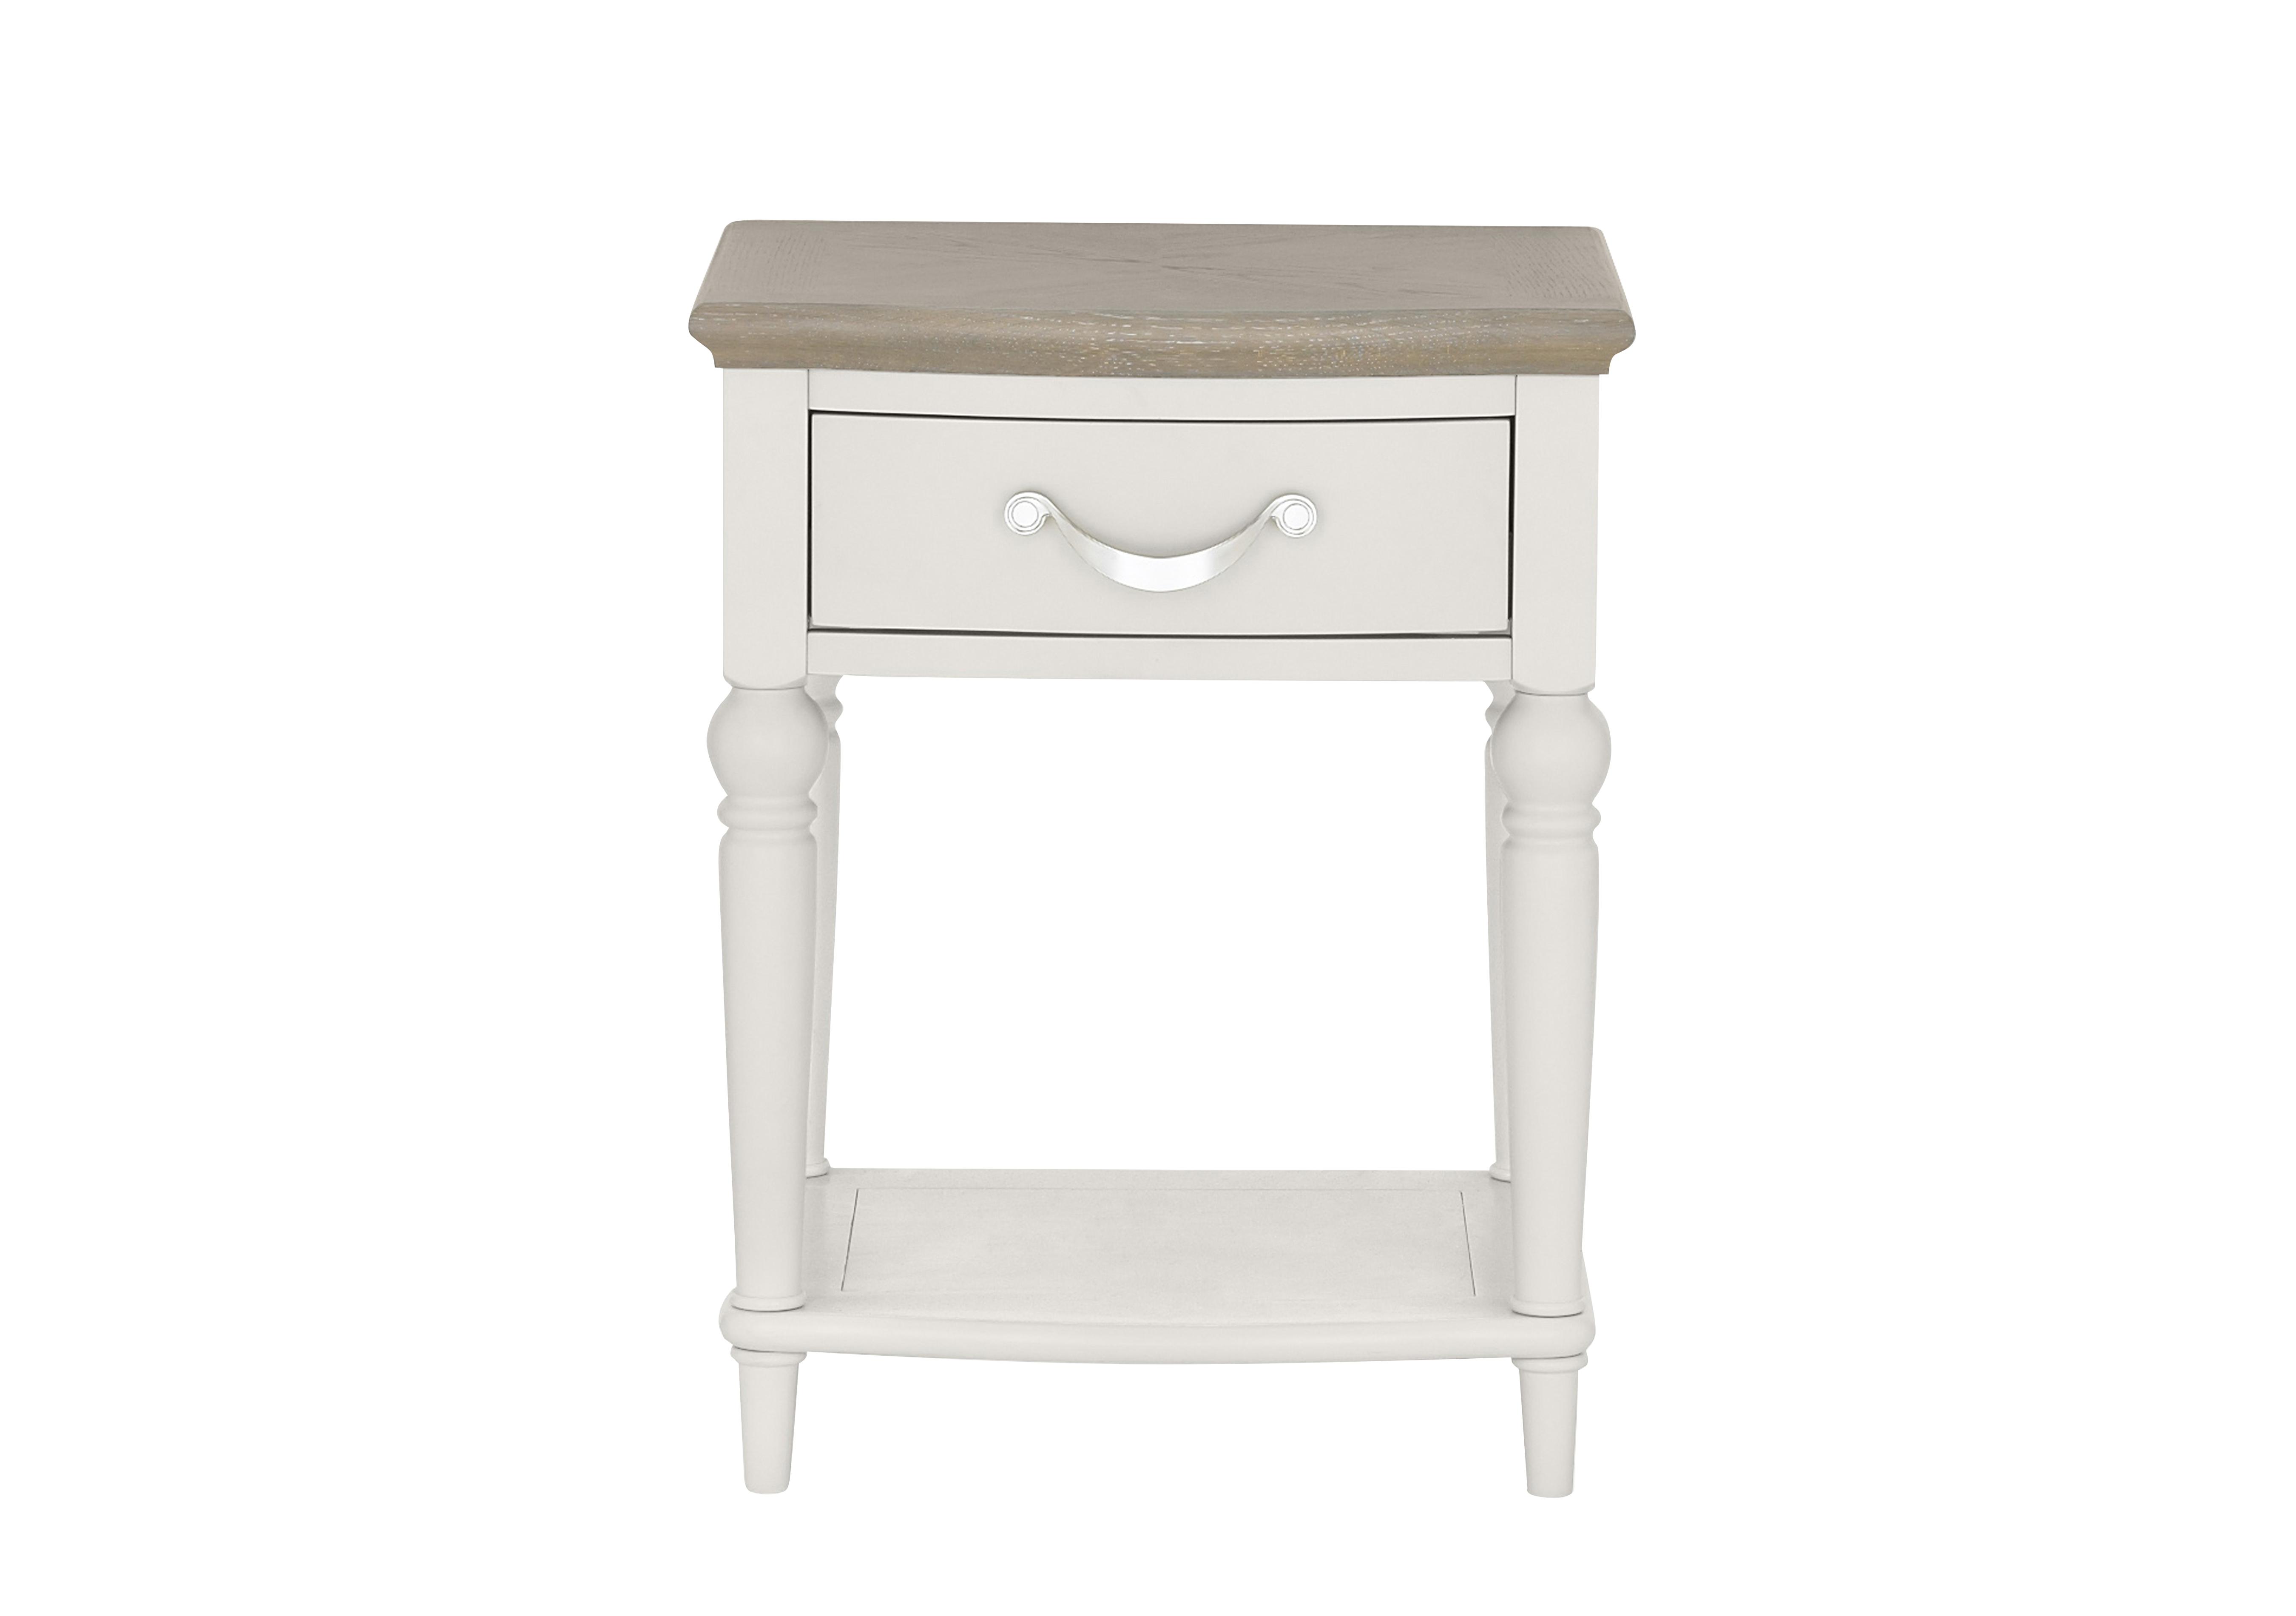 Annecy 1 Drawer Nightstand in Soft Grey And Grey Washed Oak on Furniture Village